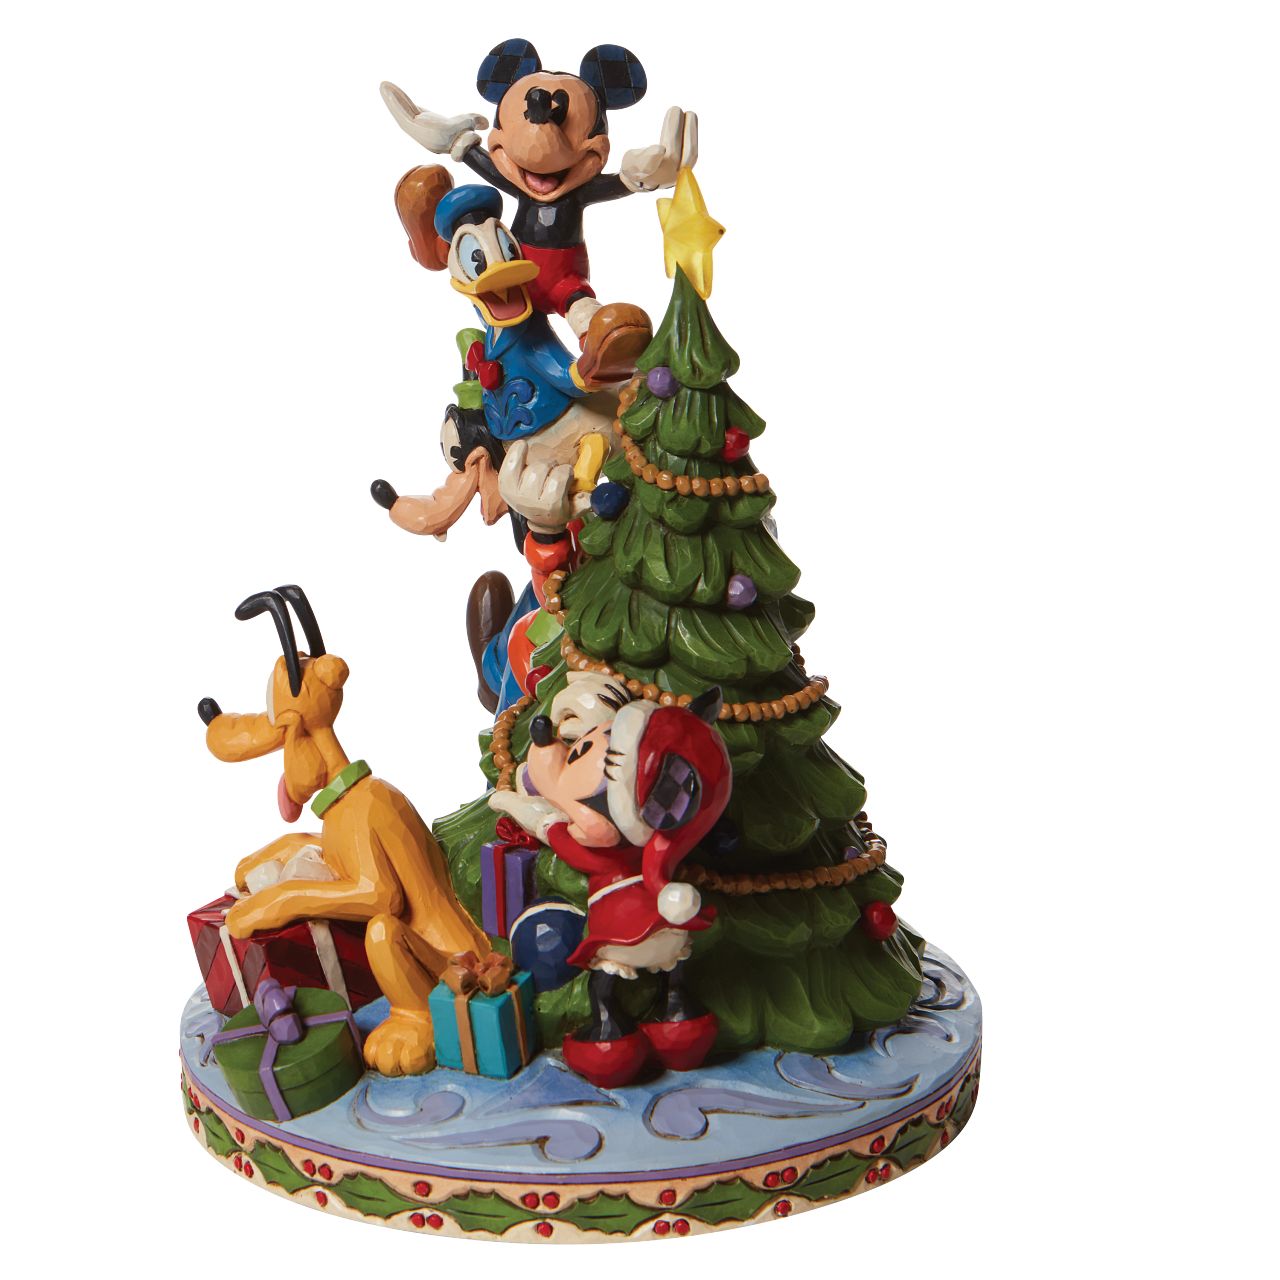 Jim Shore Merry Tree Trimming - Fab 5 Decorating Tree with illuminated  Mickey Mouse gets a hand and a boost decorating the tree this year. His friends form a teetering tower to hoist him to the top of the Mouse family tree while Minnie adds the finishing touches below in this Disney by Jim Shore design. 